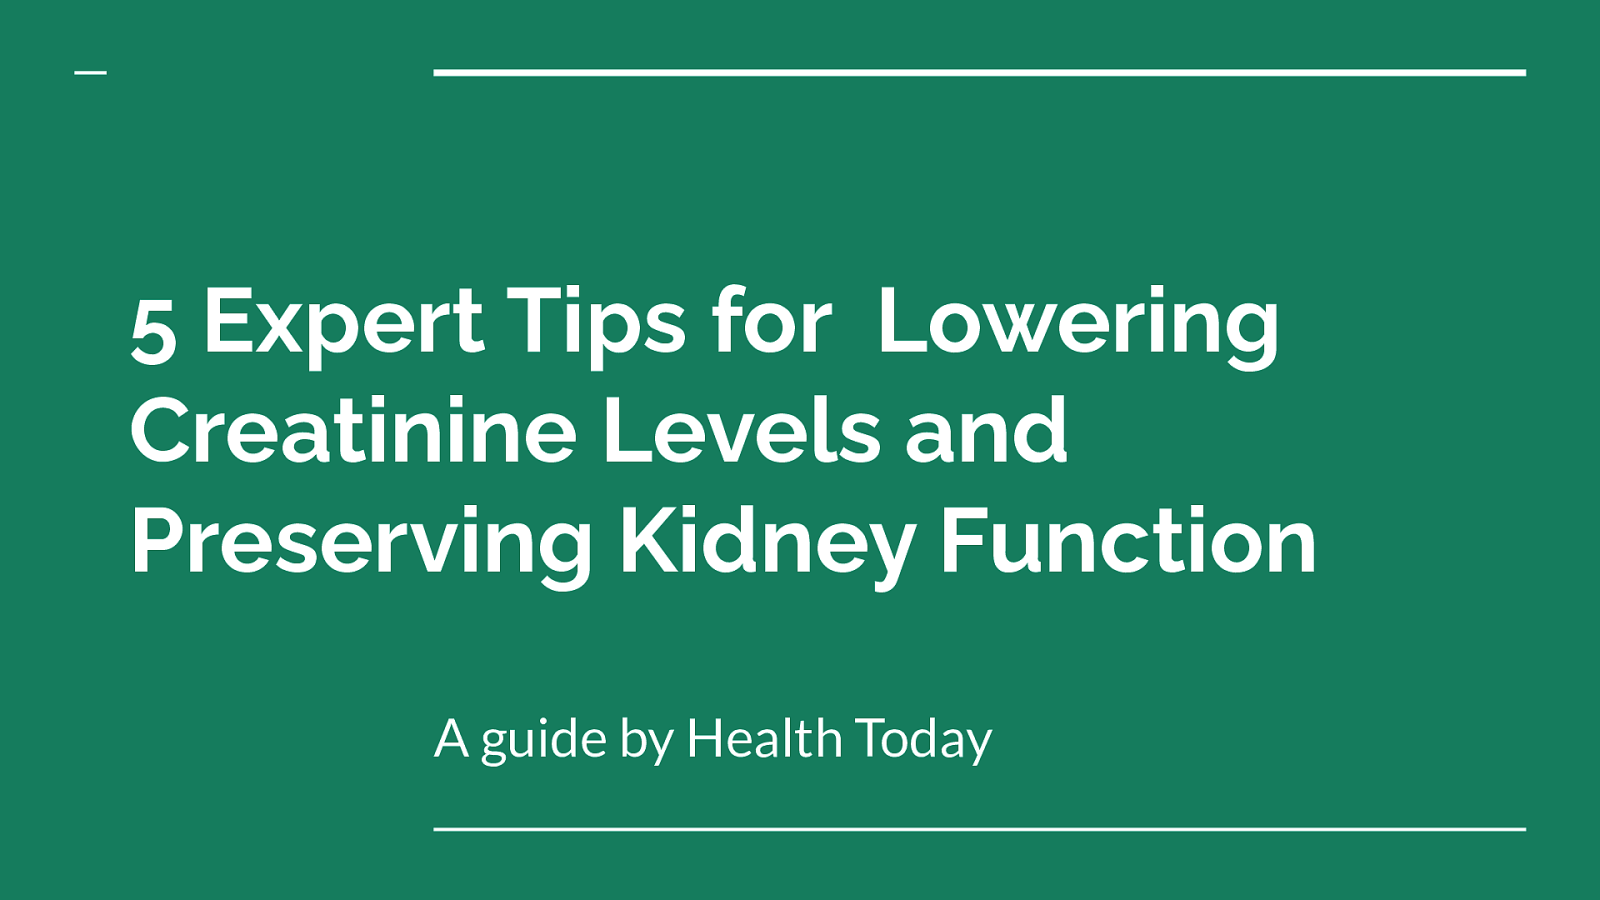 5 Expert Tips for  Lowering Creatinine Levels and Preserving Kidney Function